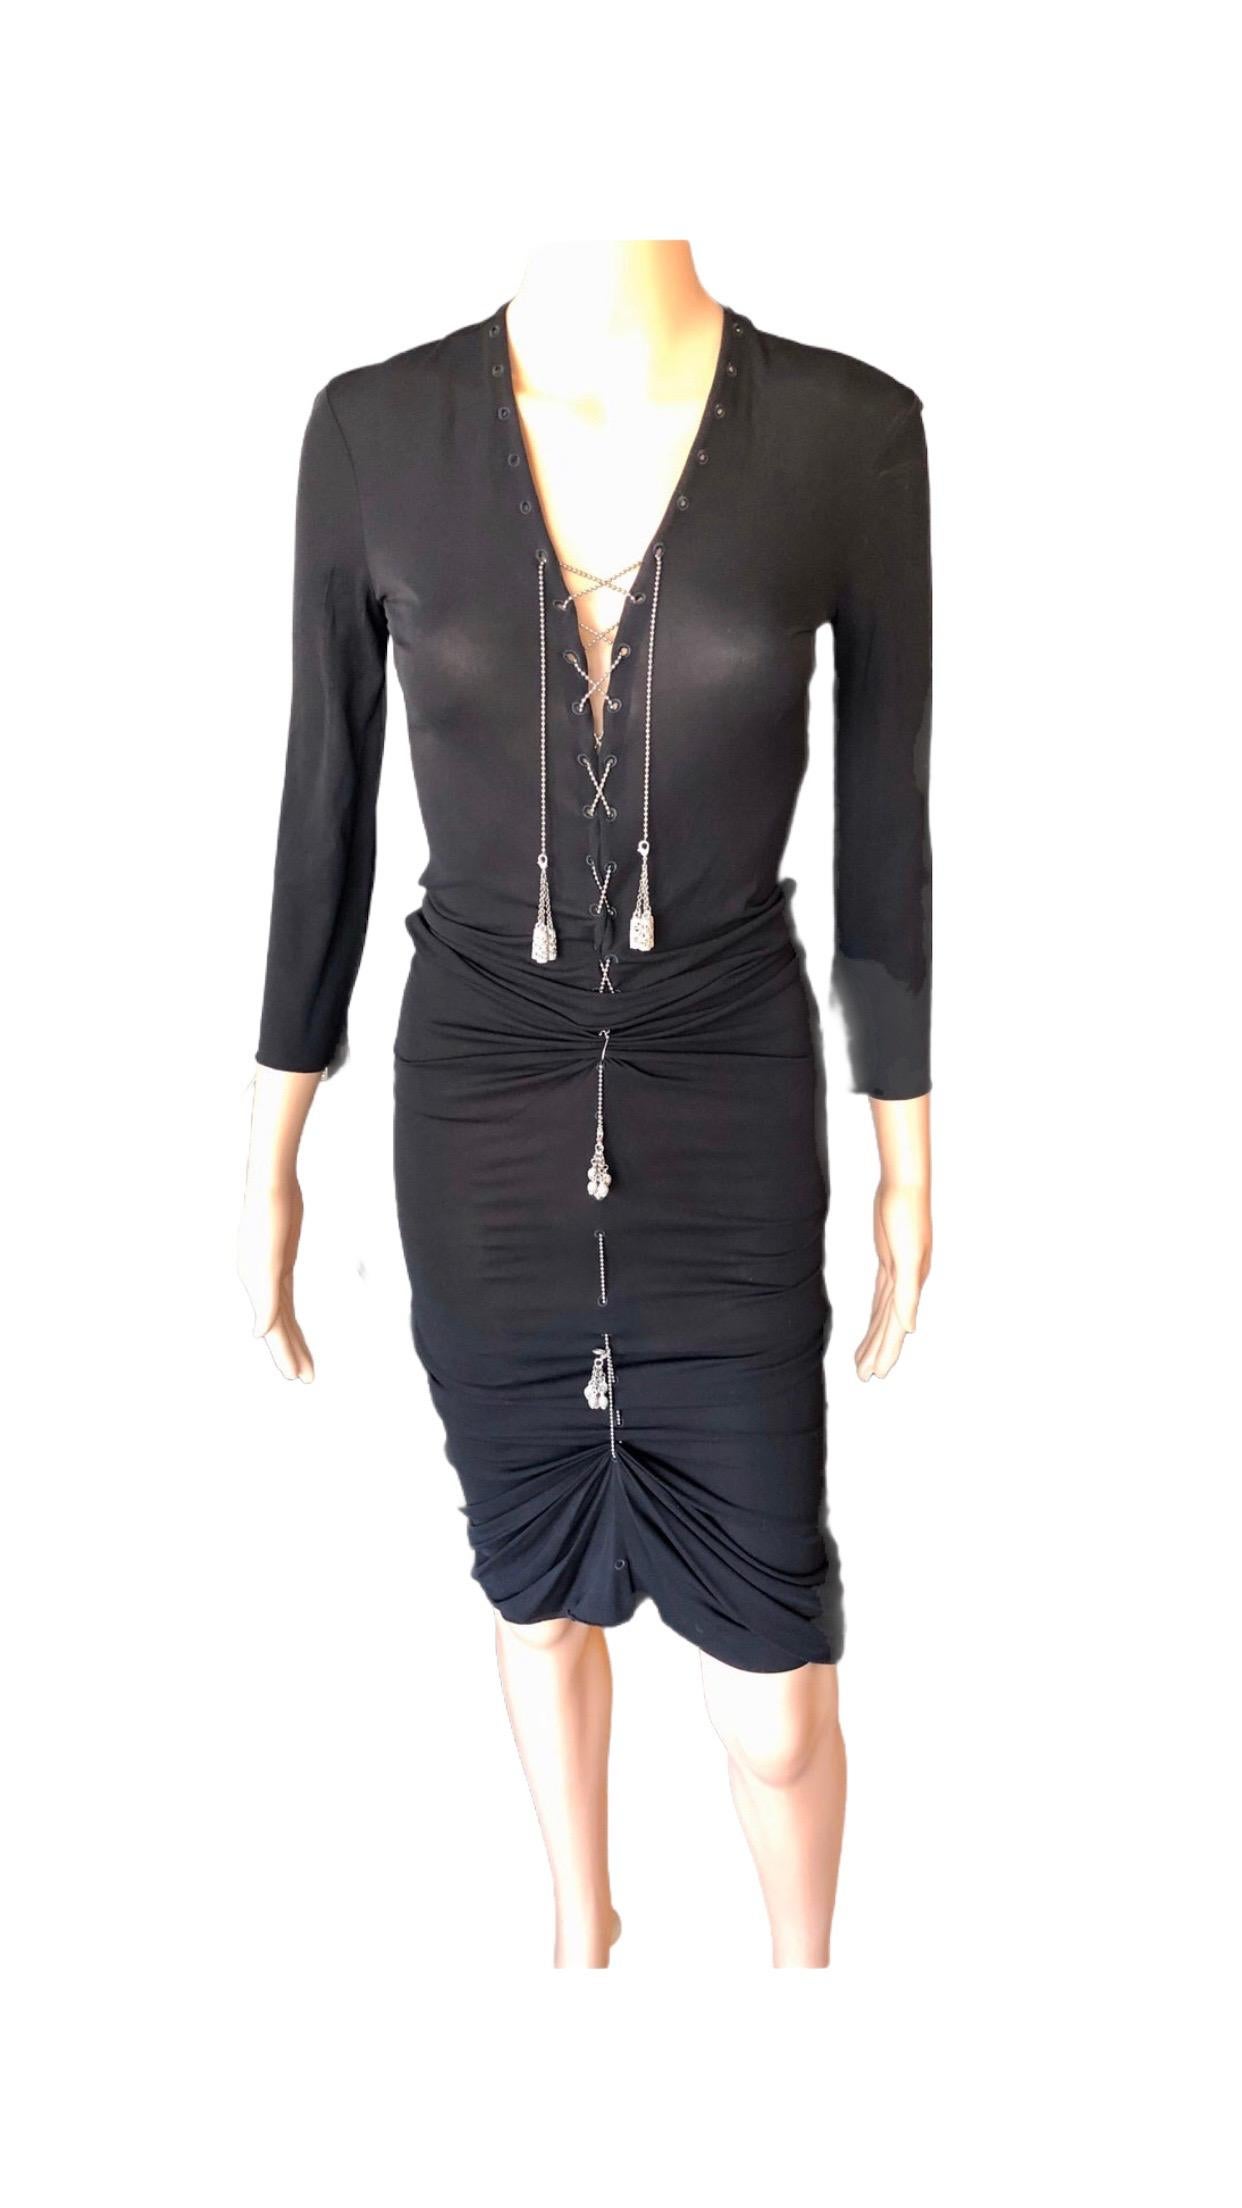  1990's Jean Paul Gaultier Knit Semi-Sheer Chain Embellished Black Dress In Good Condition For Sale In Naples, FL